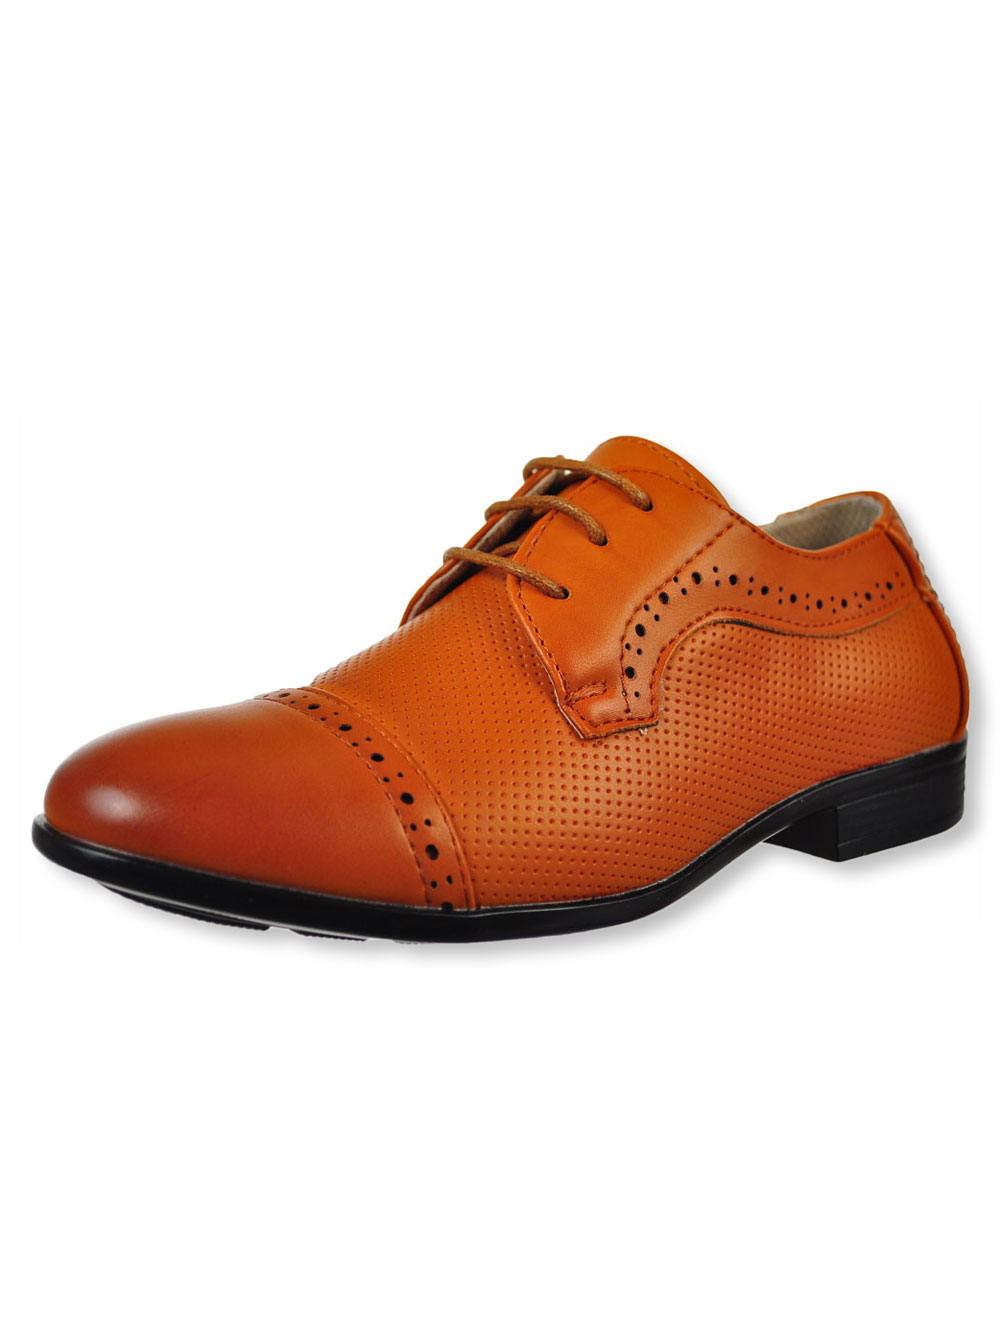 Boys' Dress Shoes by Easy Strider in 